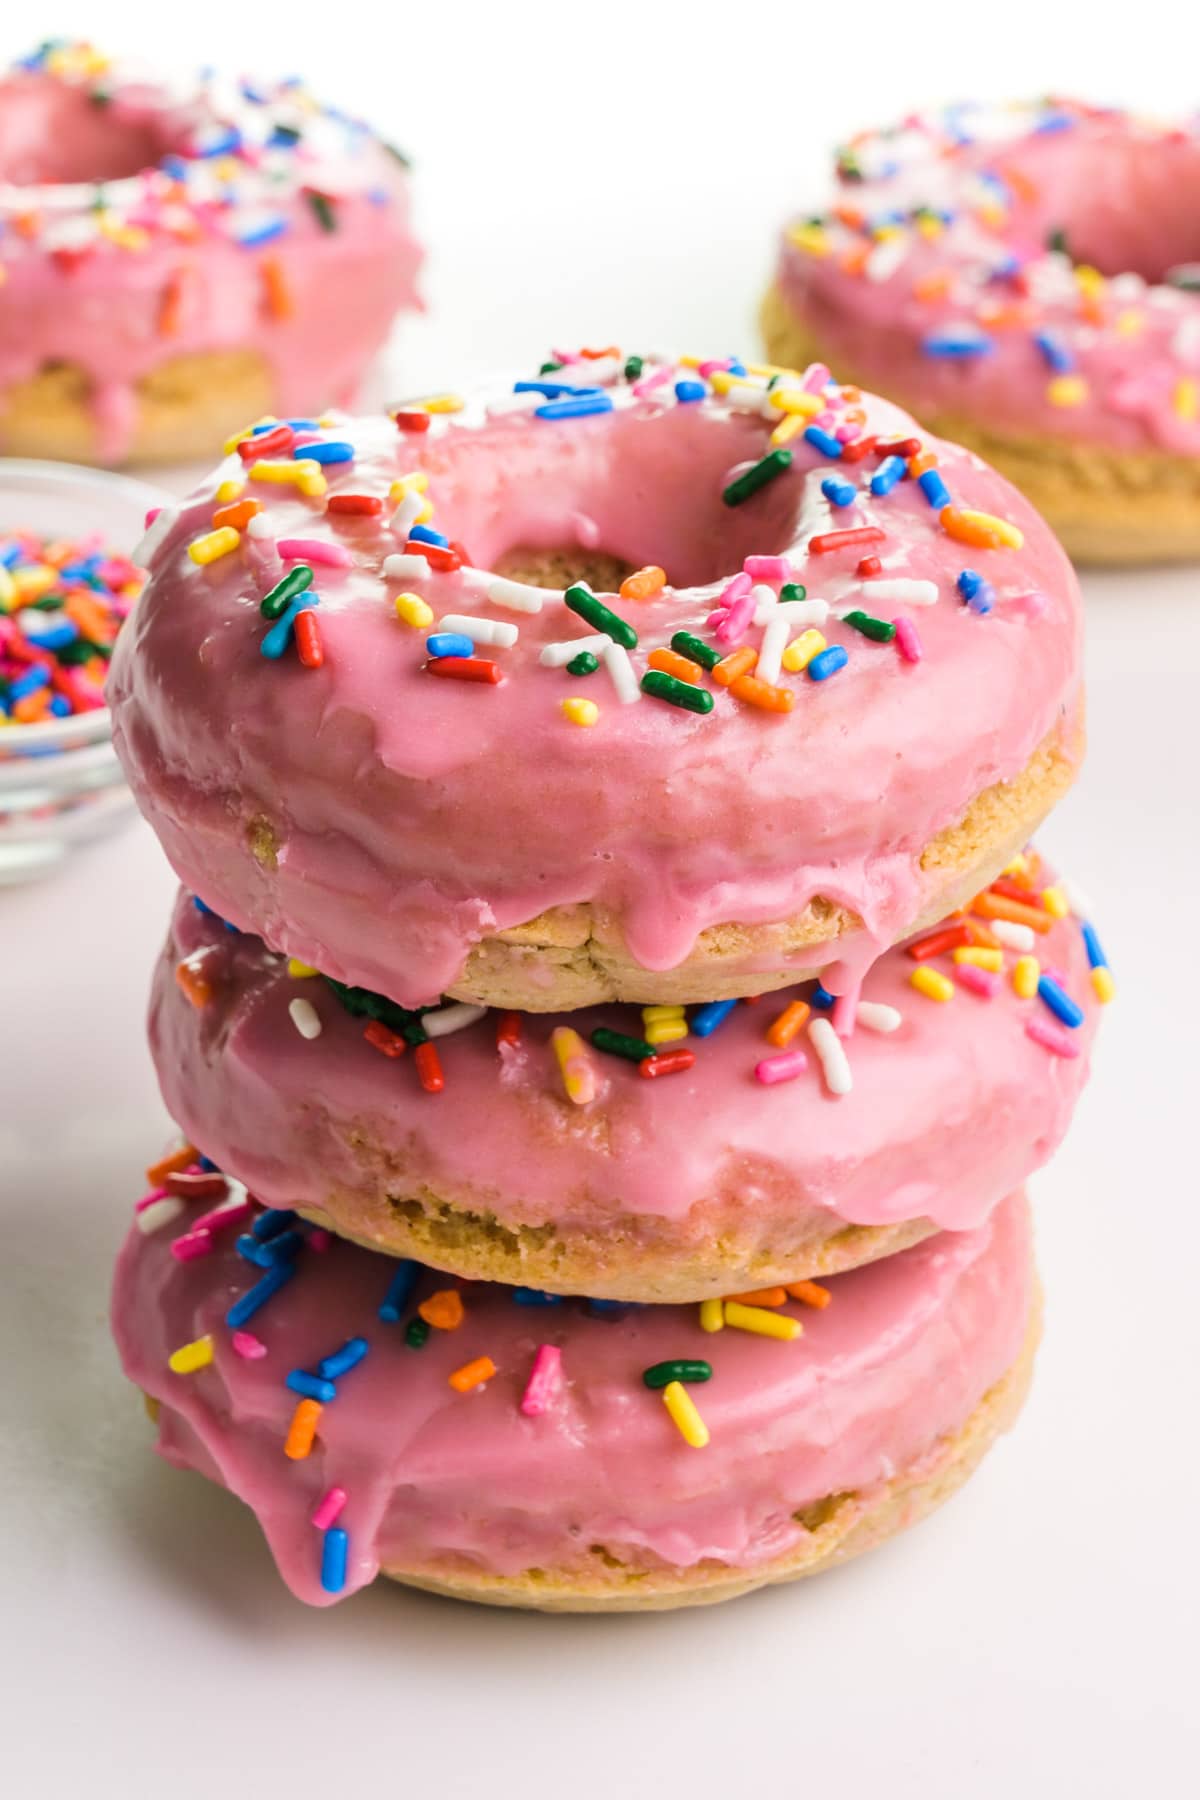 Three vegan gluten-free donuts are stacked and sit in front of more donuts in the background.